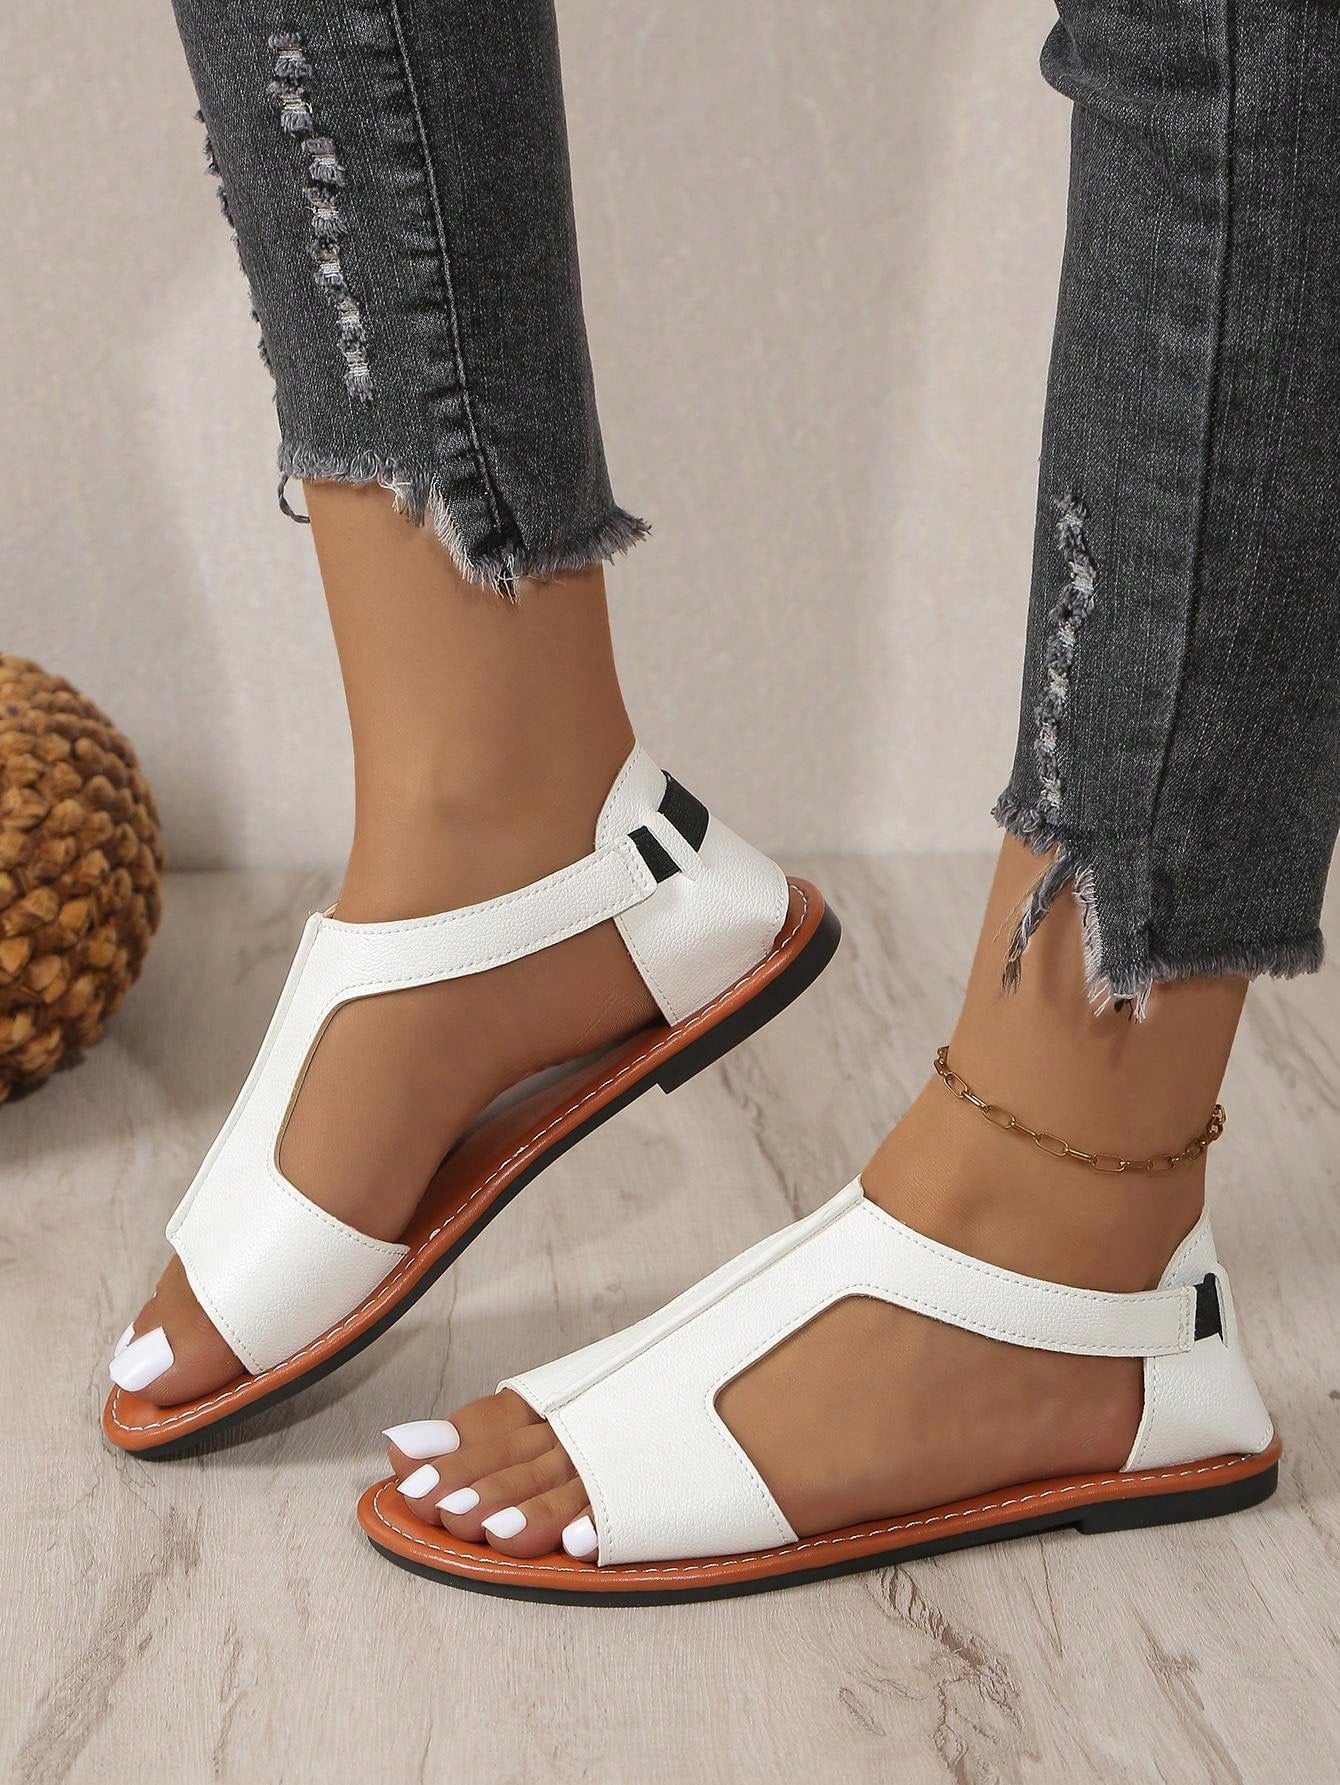 New Women Casual Comfortable Slip-On Flat Sandals With College Style Made Of Leather, Ideal For Beach Party And Music Festival-White-9